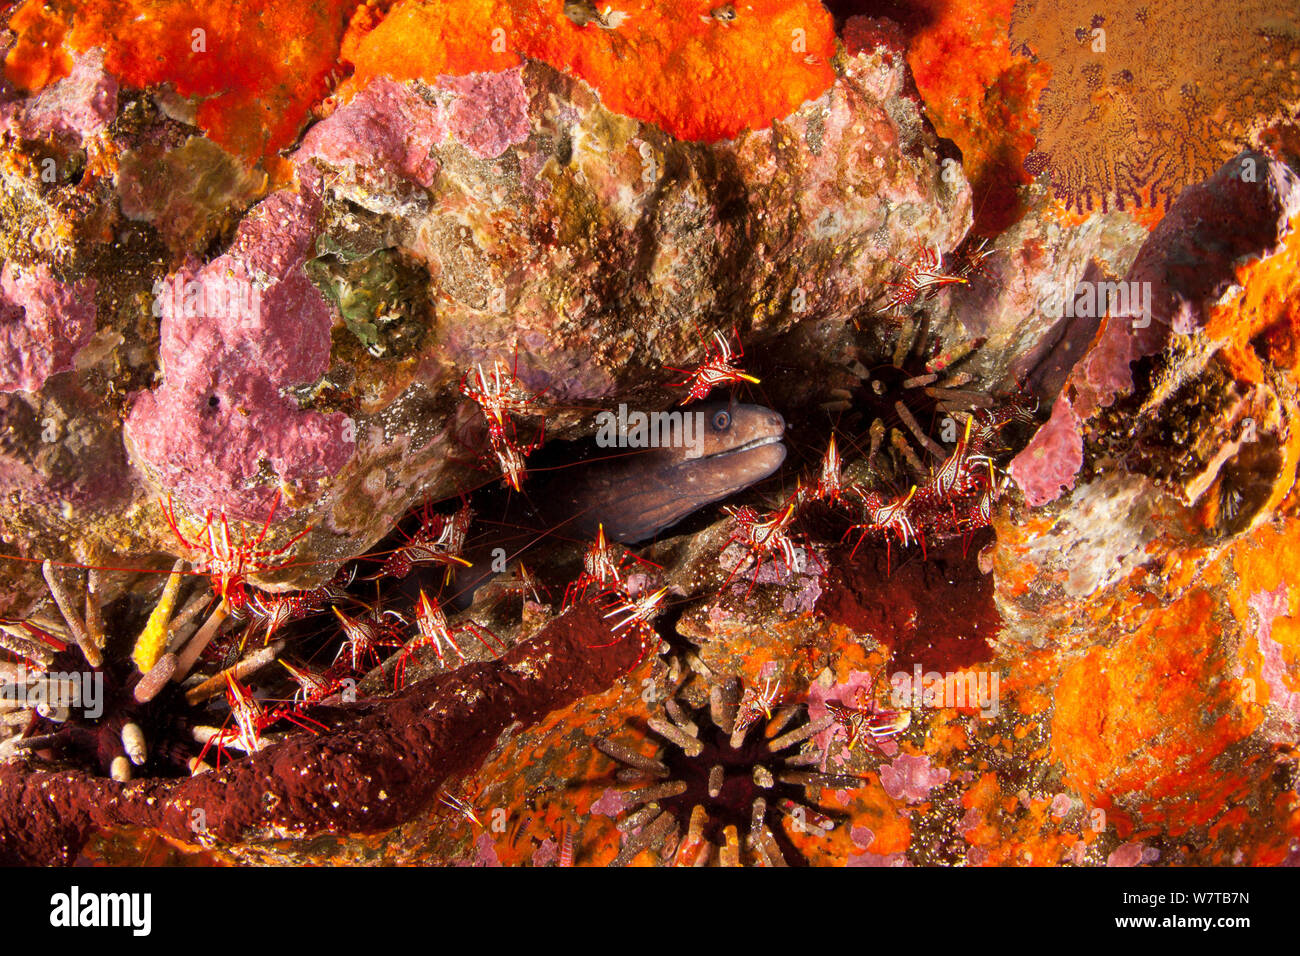 Moray Eel (Gymnothorax prasinus) with Rock shrimps (Lysmata sp) in urchins and sponge encrusted rocks.  Galapagos Islands. Stock Photo